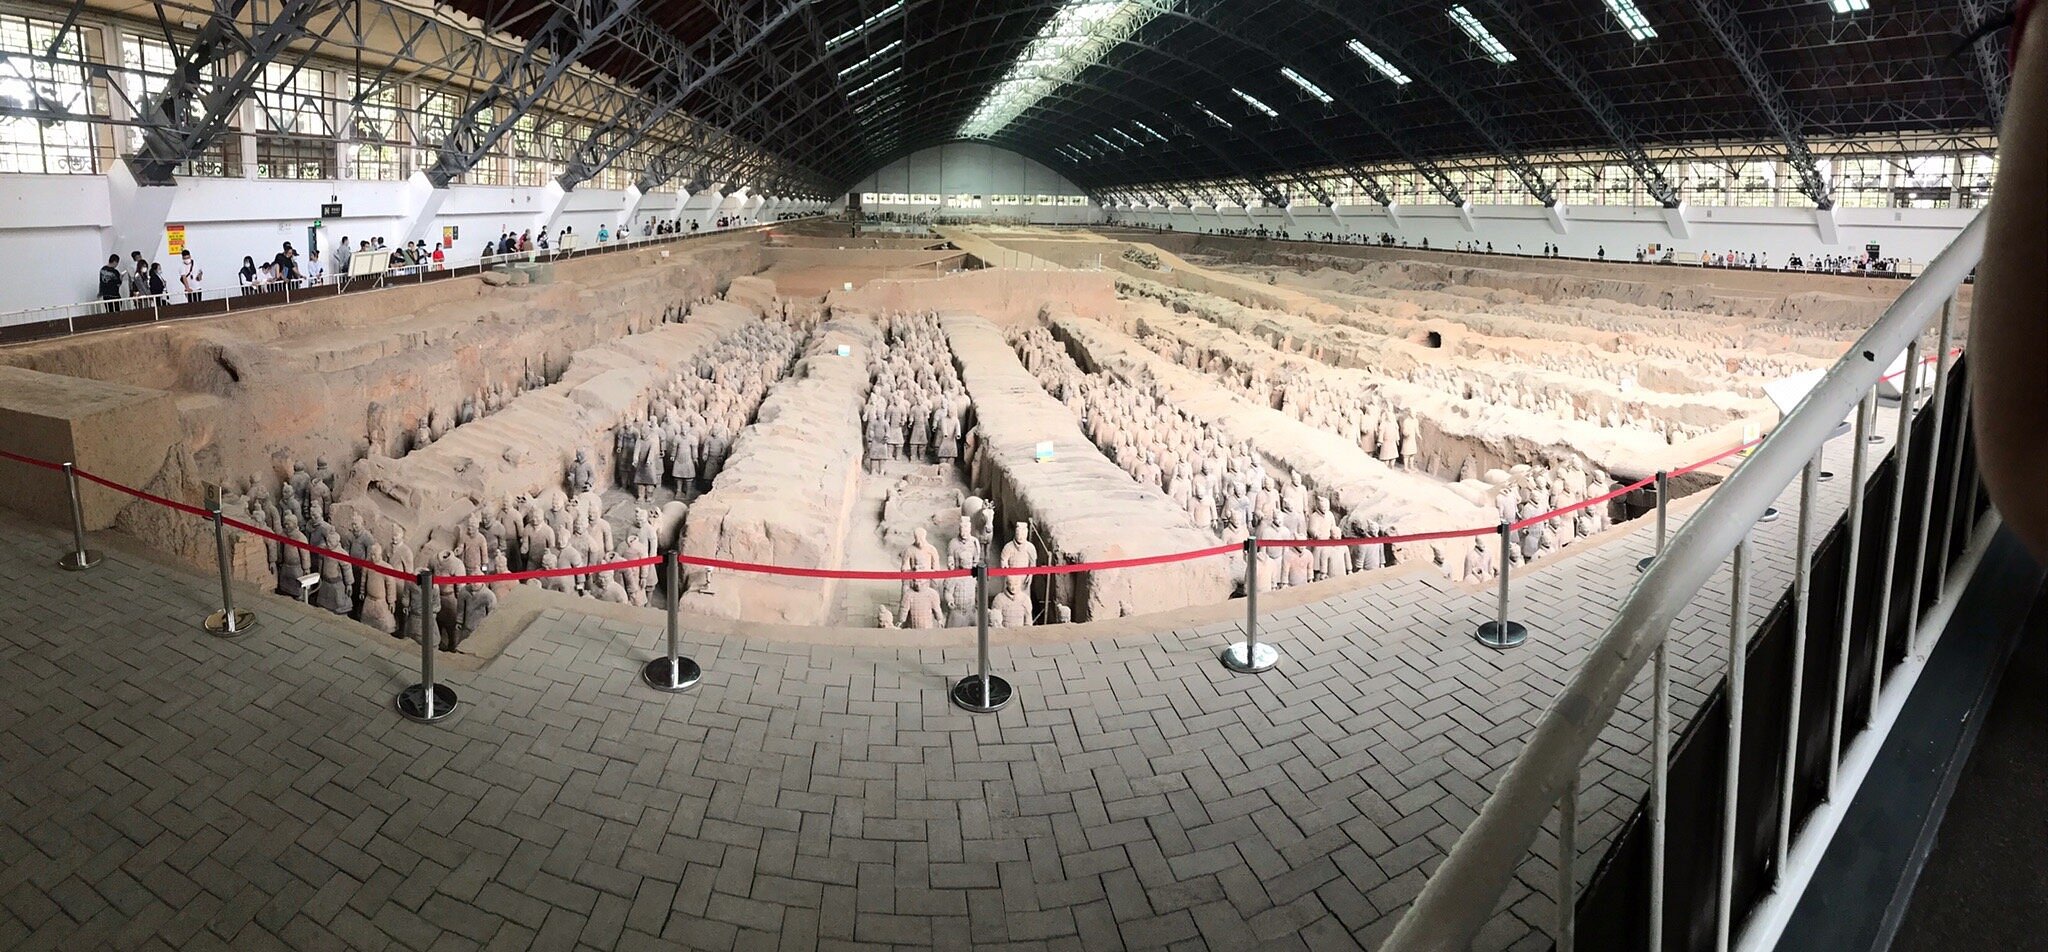 Terracotta Warriors Tour (Xi'an) - All You Need to Know BEFORE You Go